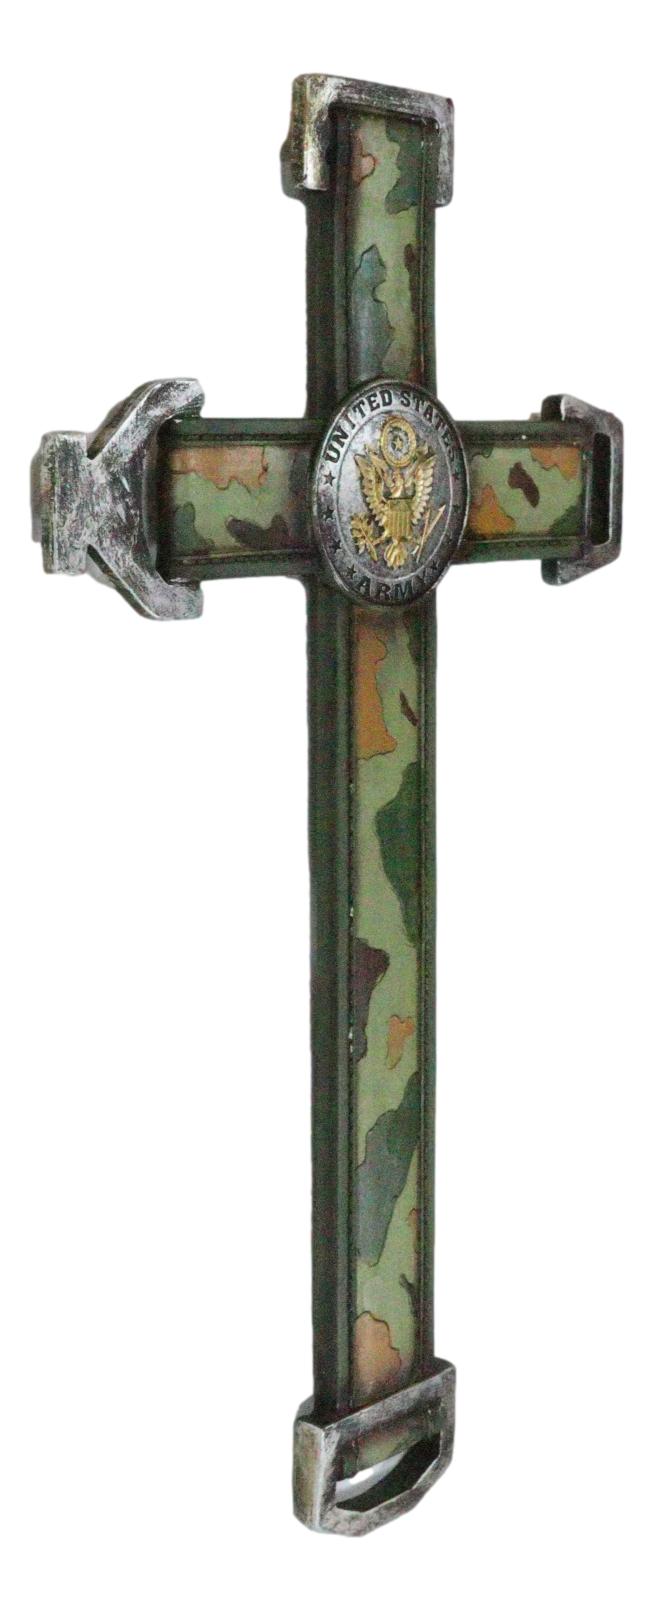 Western United States Army Military Eagle Medallion in Camo Green Wall Cross